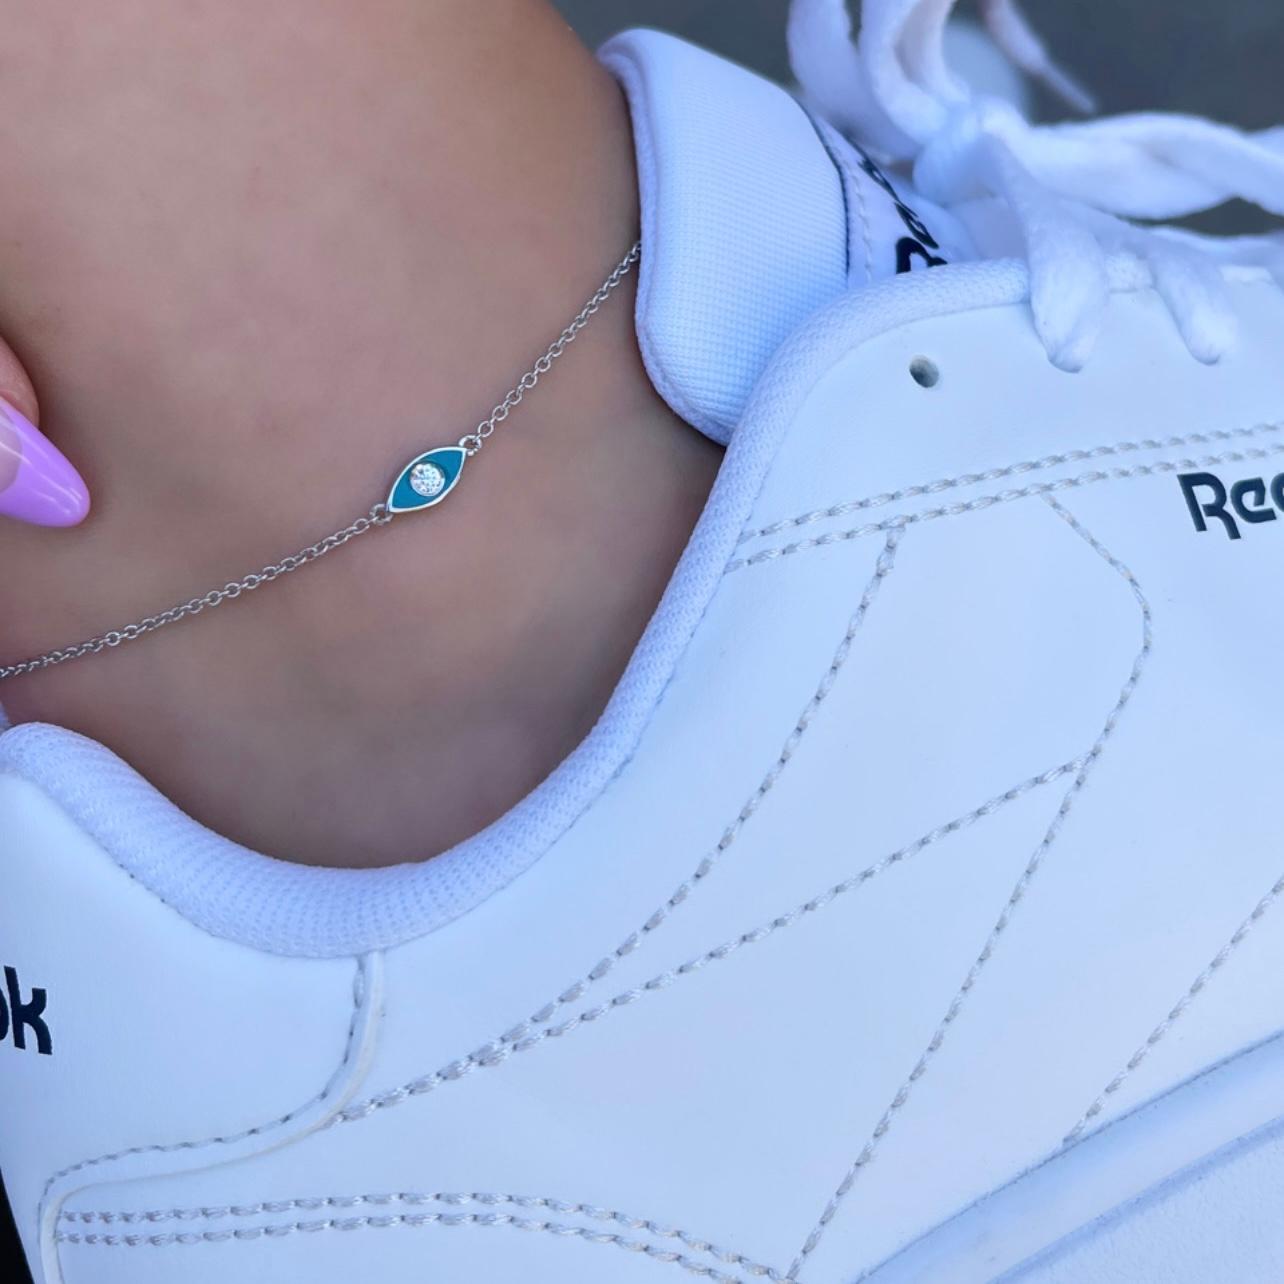 Diamond Turquoise Enamel Evil Eye Anklet in 14 Karat White Gold -Shlomit Rogel

Dazzling and elegantly timeless, this dainty turquoise enamel evil eye ankle bracelet will steal your heart. Crafted from 14k solid white gold and embellished with a